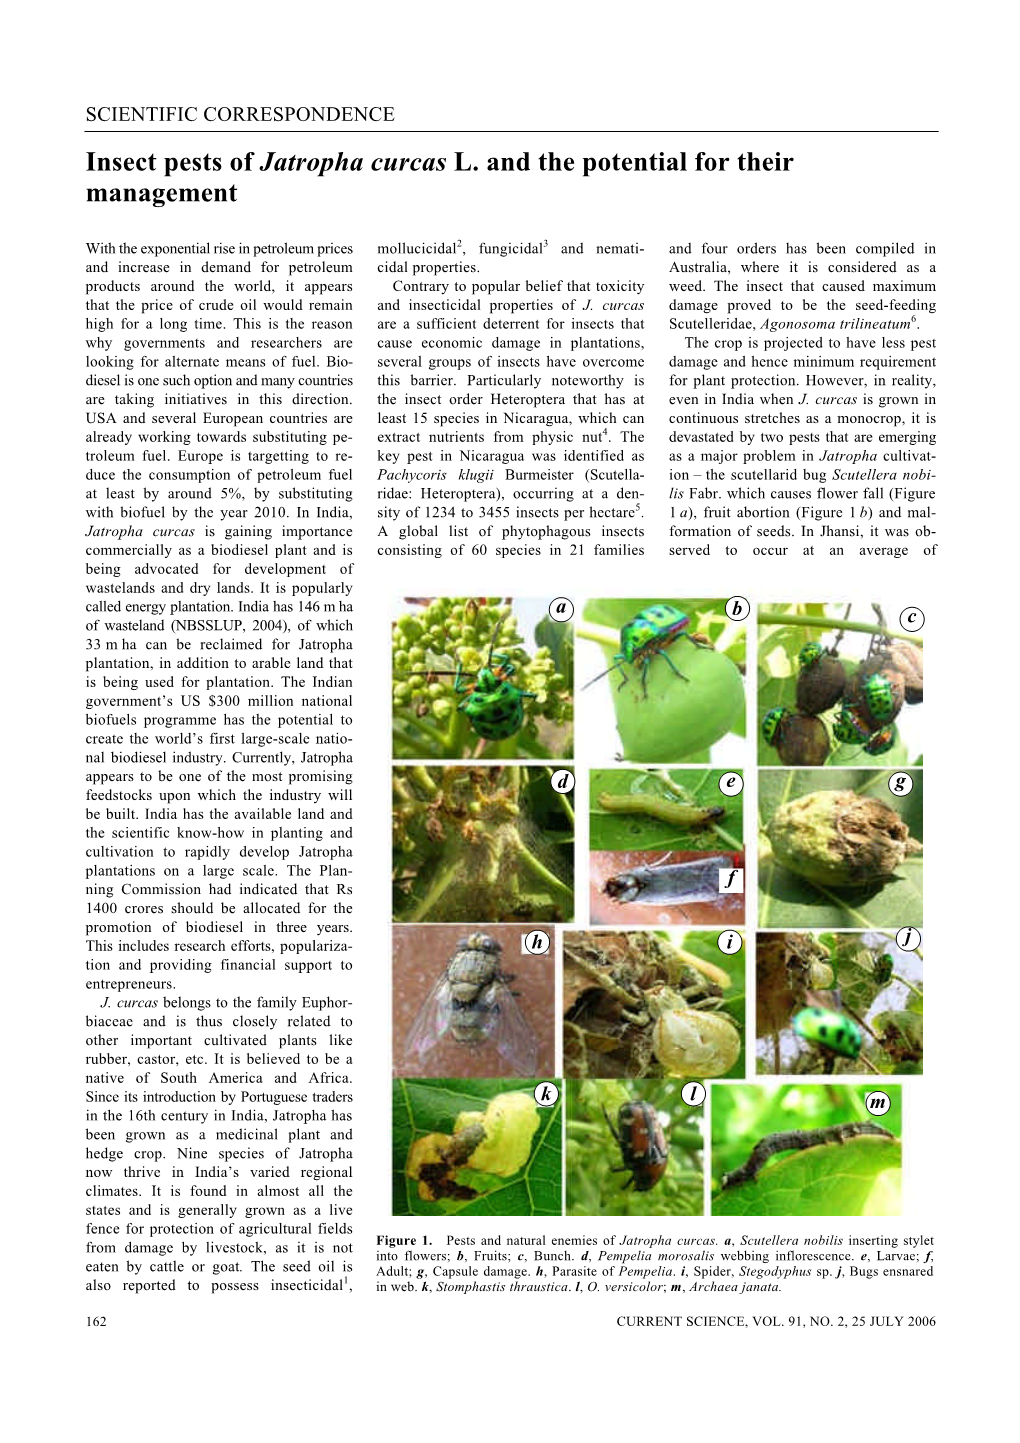 Insect Pests of Jatropha Curcas L. and the Potential for Their Management